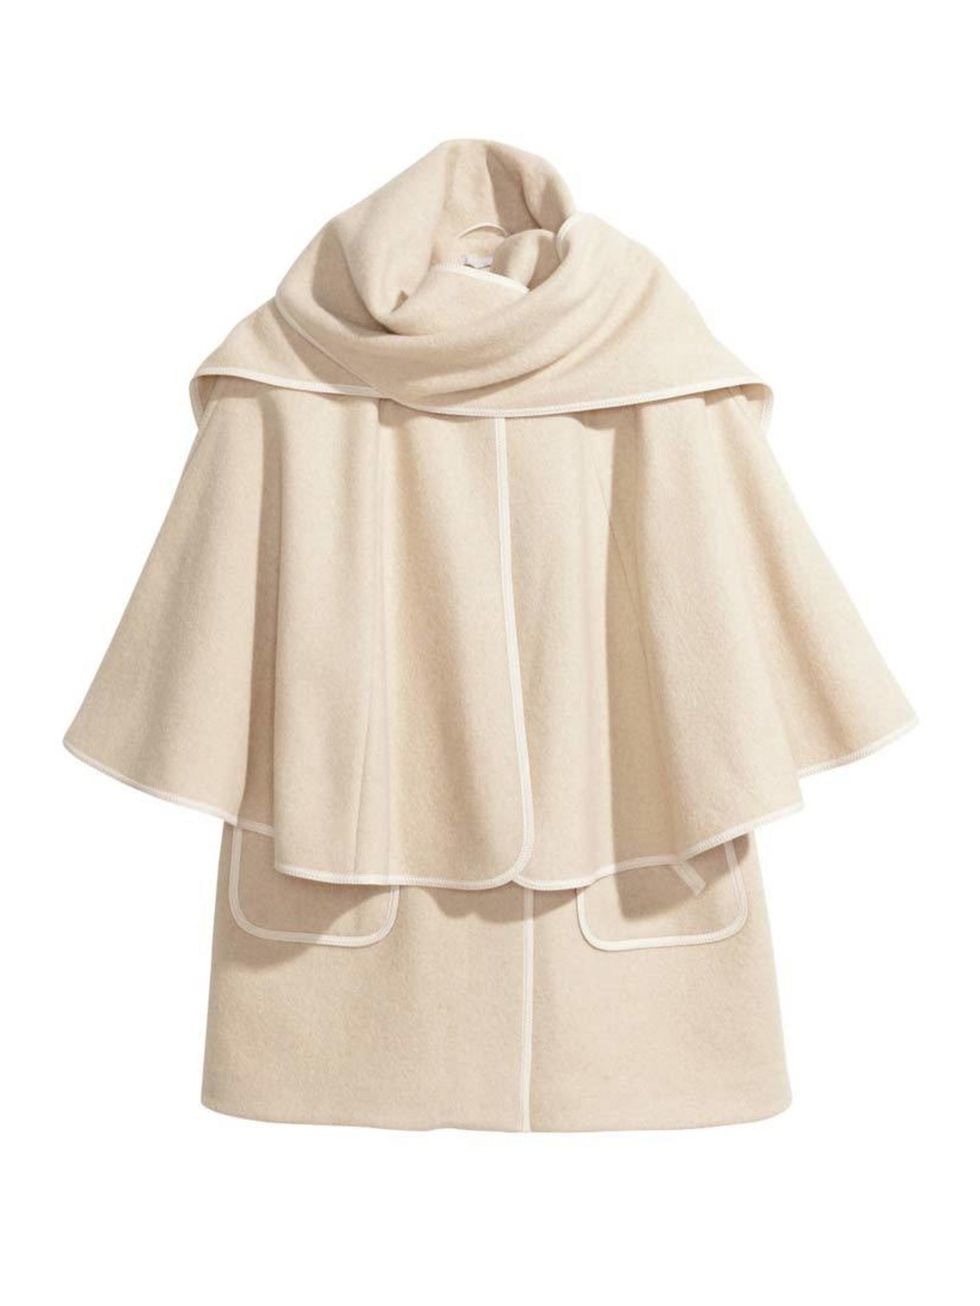 <p>Trust H&M to turn out this season's must have cape-coat, on a budget.</p>

<p><a href="http://www.hm.com/gb/product/61254?article=61254-A" target="_blank">H&M</a> coat, £79.99</p>